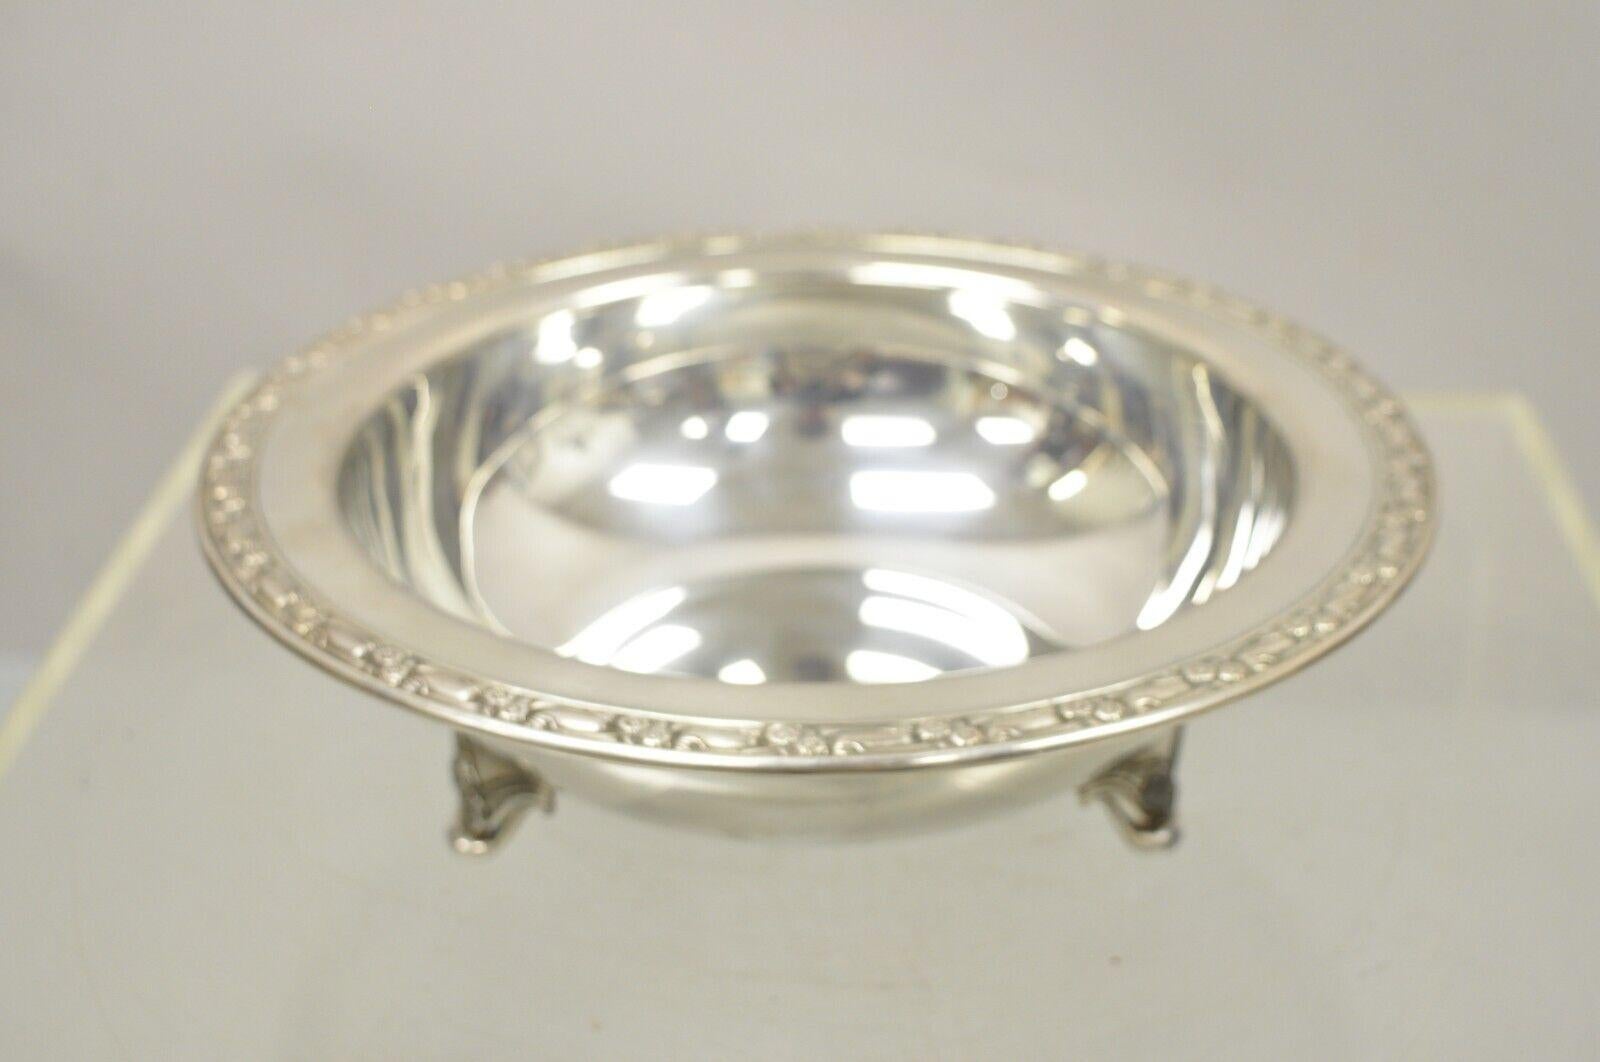 Vintage Oneida Ltd Rose Decorated Silver Plated Round Serving Bowl Dish In Good Condition For Sale In Philadelphia, PA